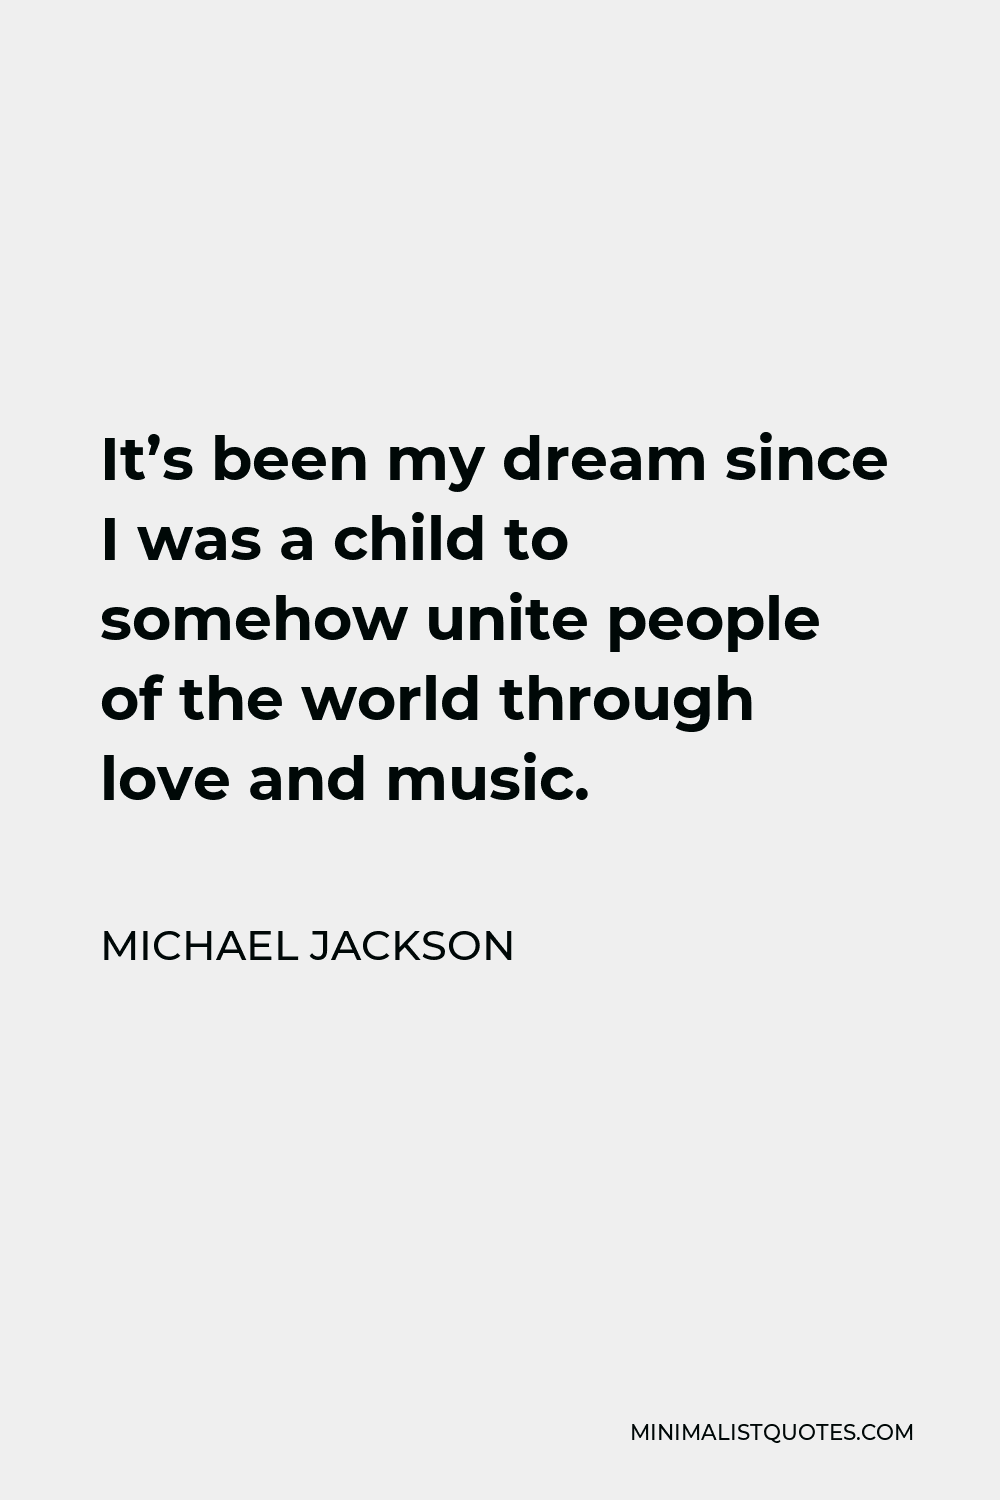 Michael Jackson Quote - It’s been my dream since I was a child to somehow unite people of the world through love and music.